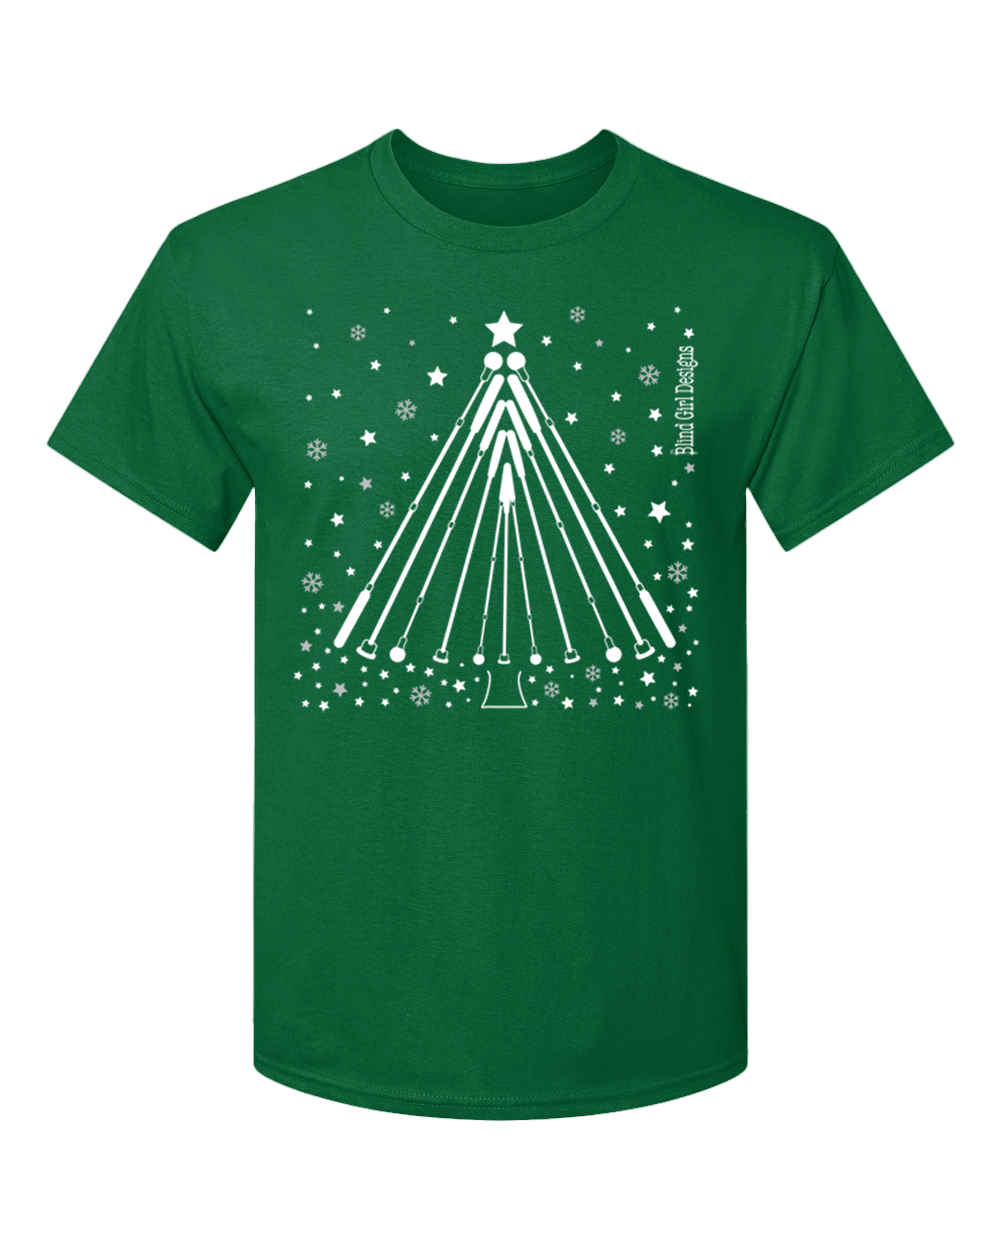 New 3D!  Tactile Winter Tree White Cane T-Shirt - Deep Forest Green